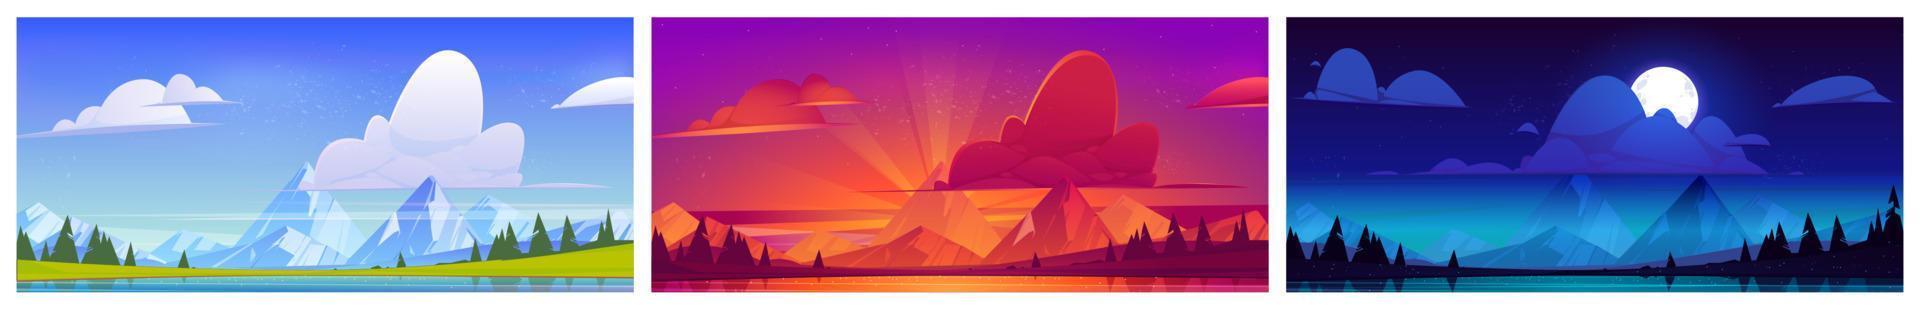 Lake and mountains at different times of day vector